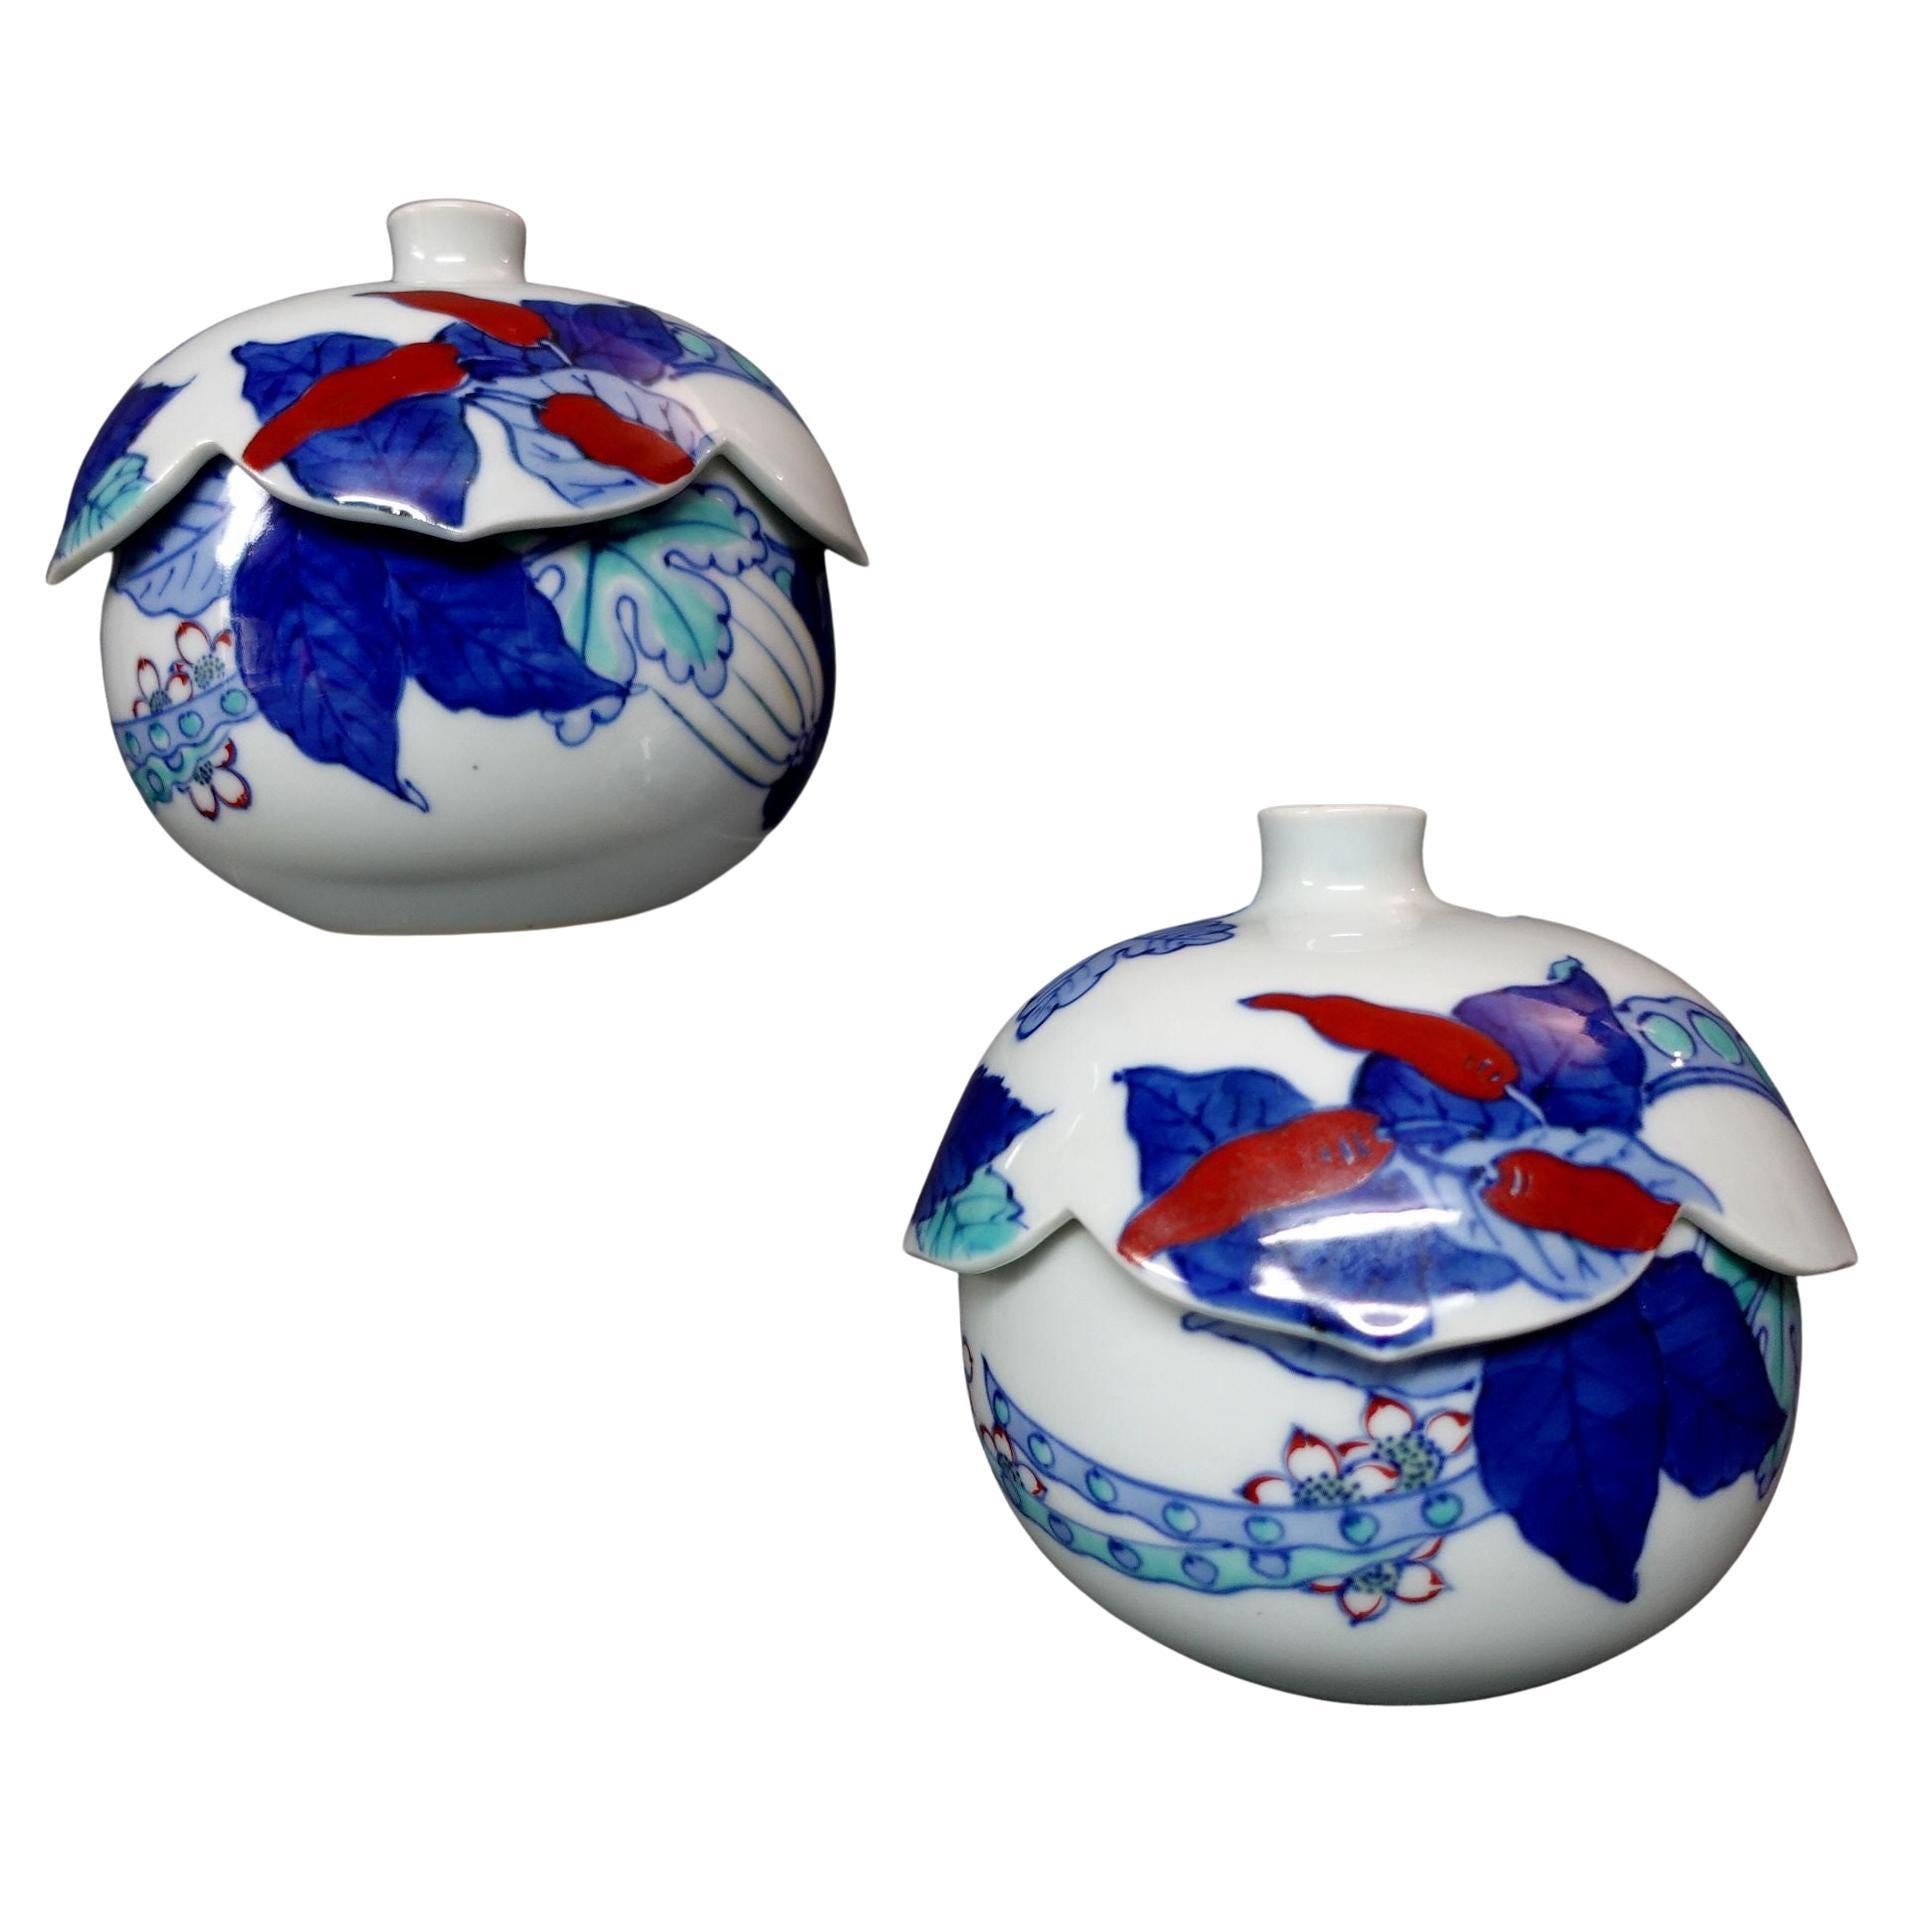 Pair of Japanese Imari Lidded Bowls, 19th Century, "Marked" For Sale